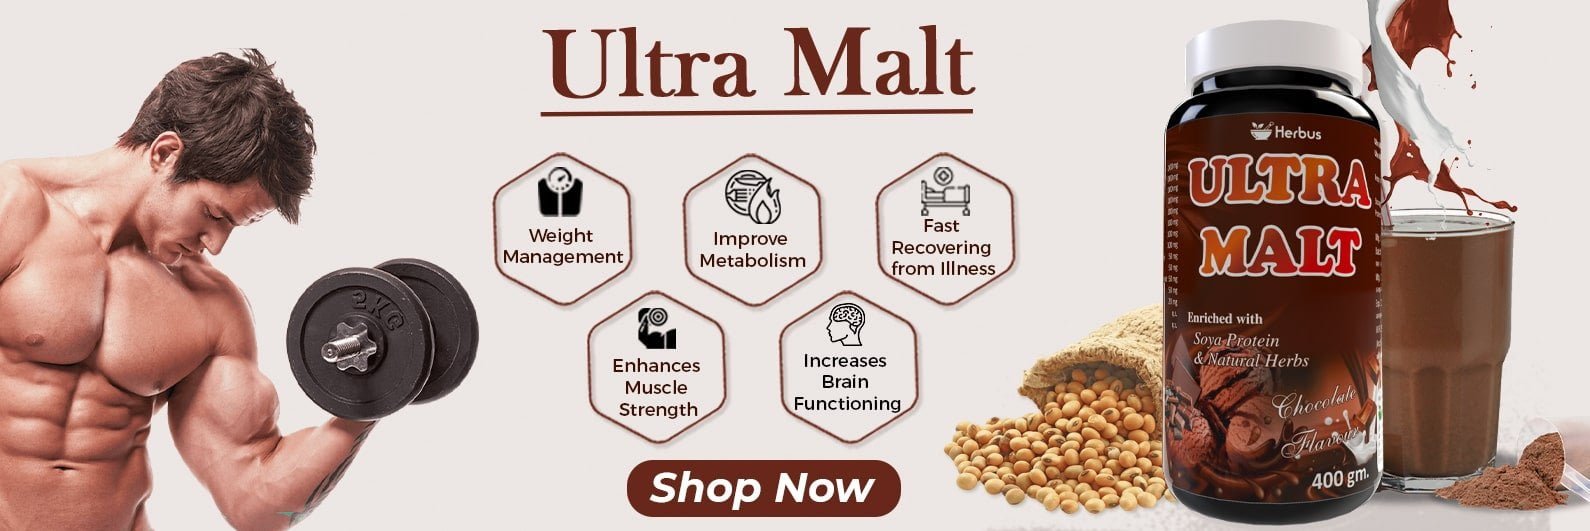 Jio Malt - Enriched with Soya Protein & Natural Herbs - Marowin Healthcare